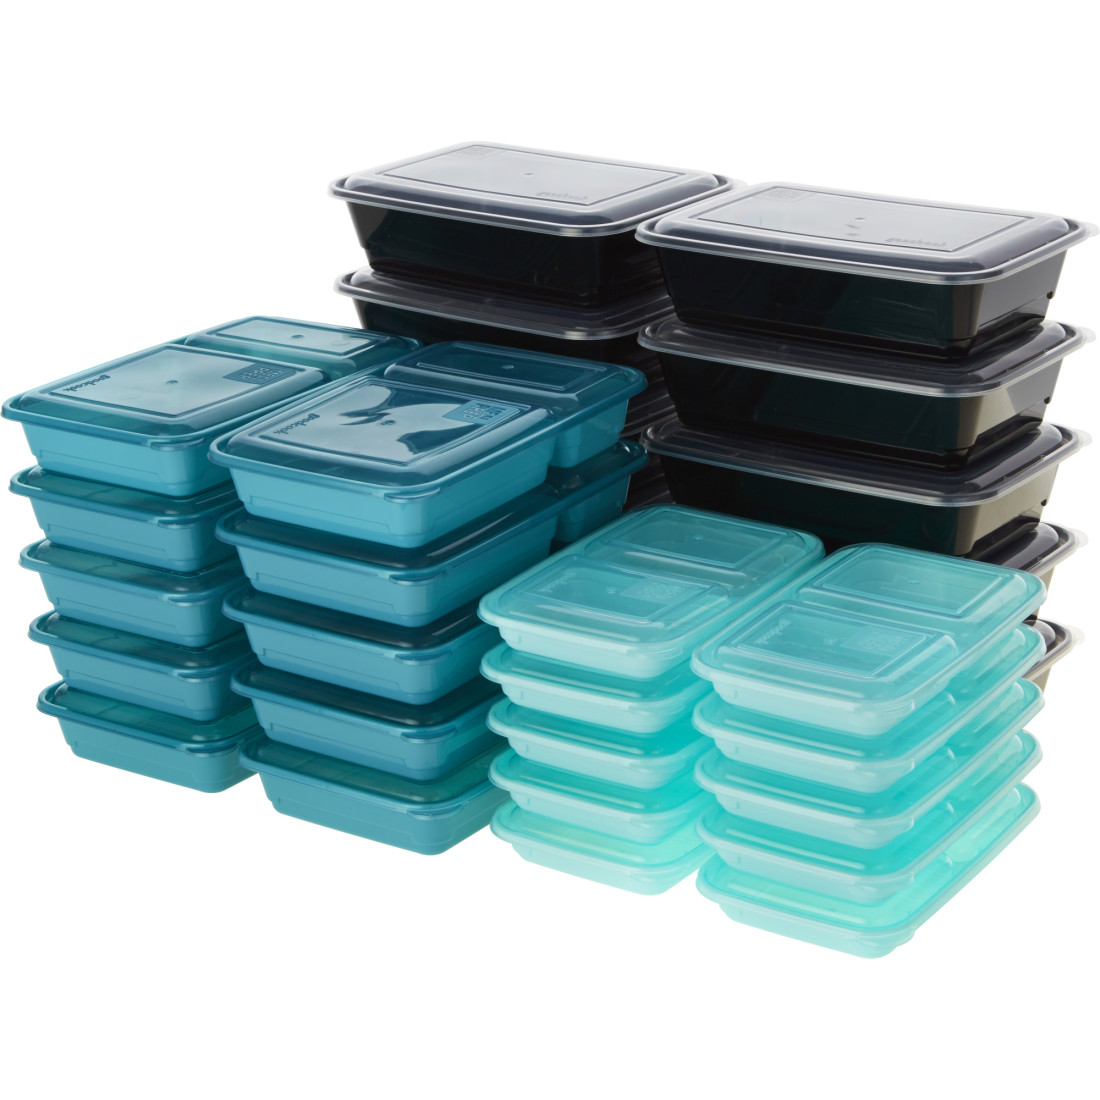 Good Cook Containers + Lids Meal Prep 1 Compartment 4 Cup (1 ct